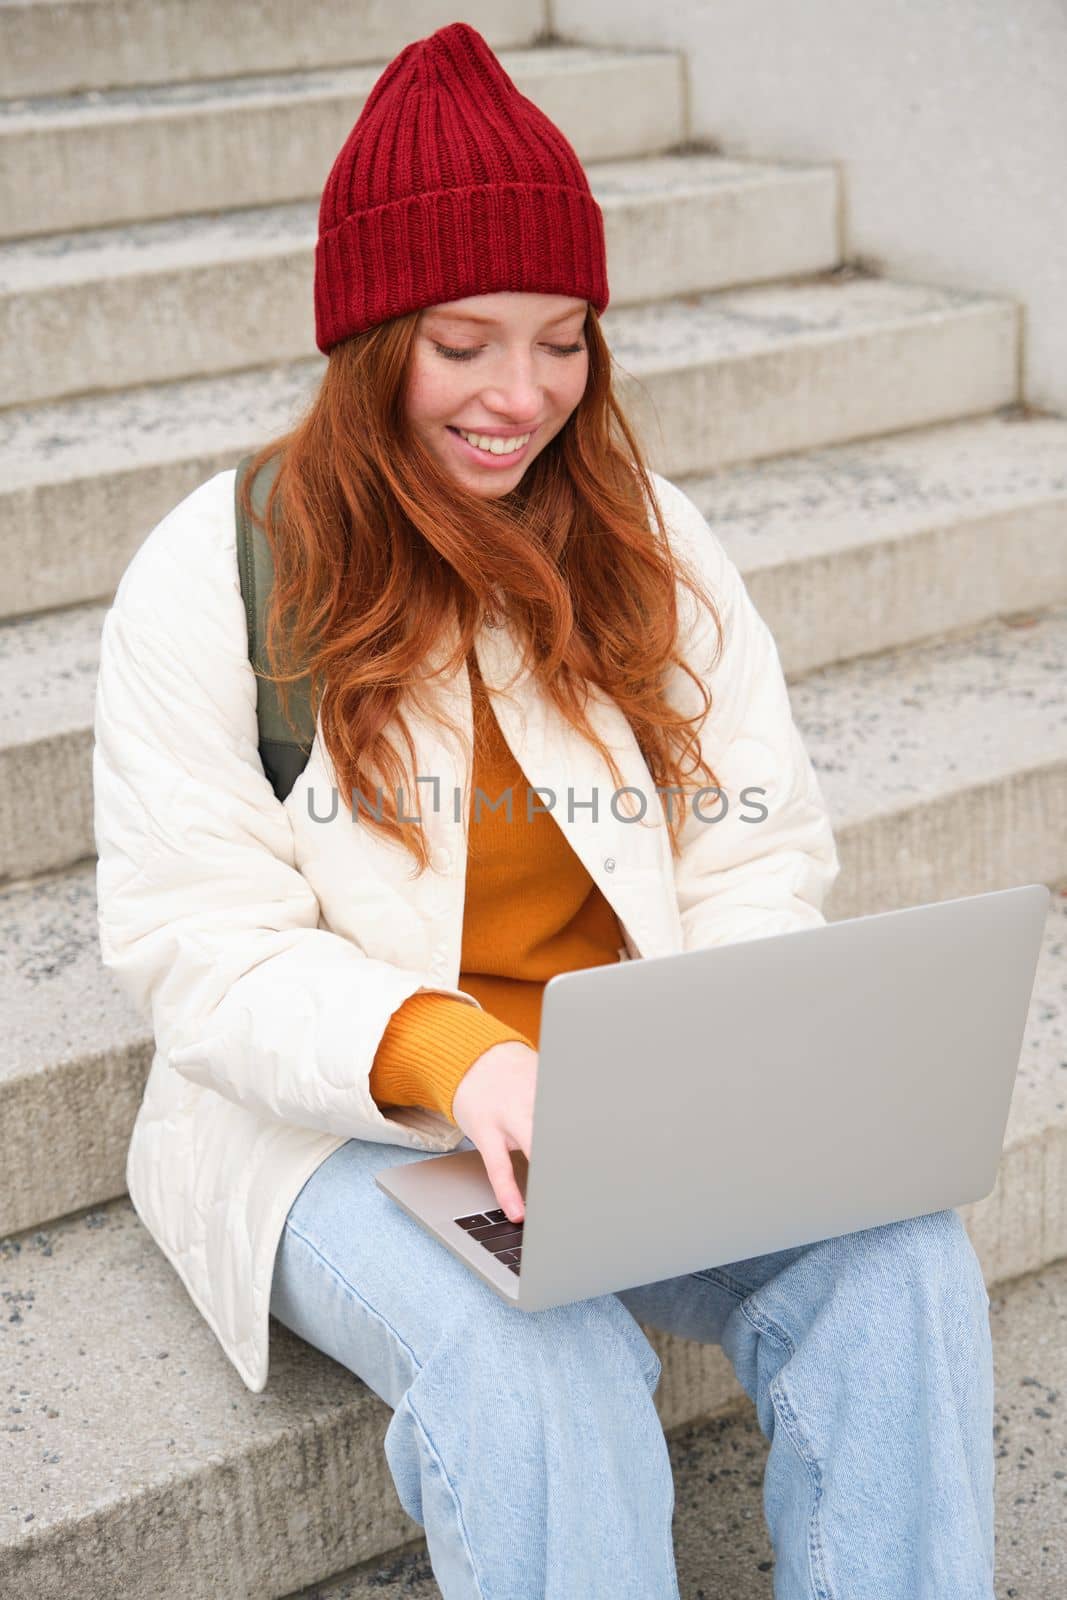 Smiling redhead girl, young woman typing on laptop keyboard, sitting outdoors on stairs with computer, working remote, doing her homework on fresh air.